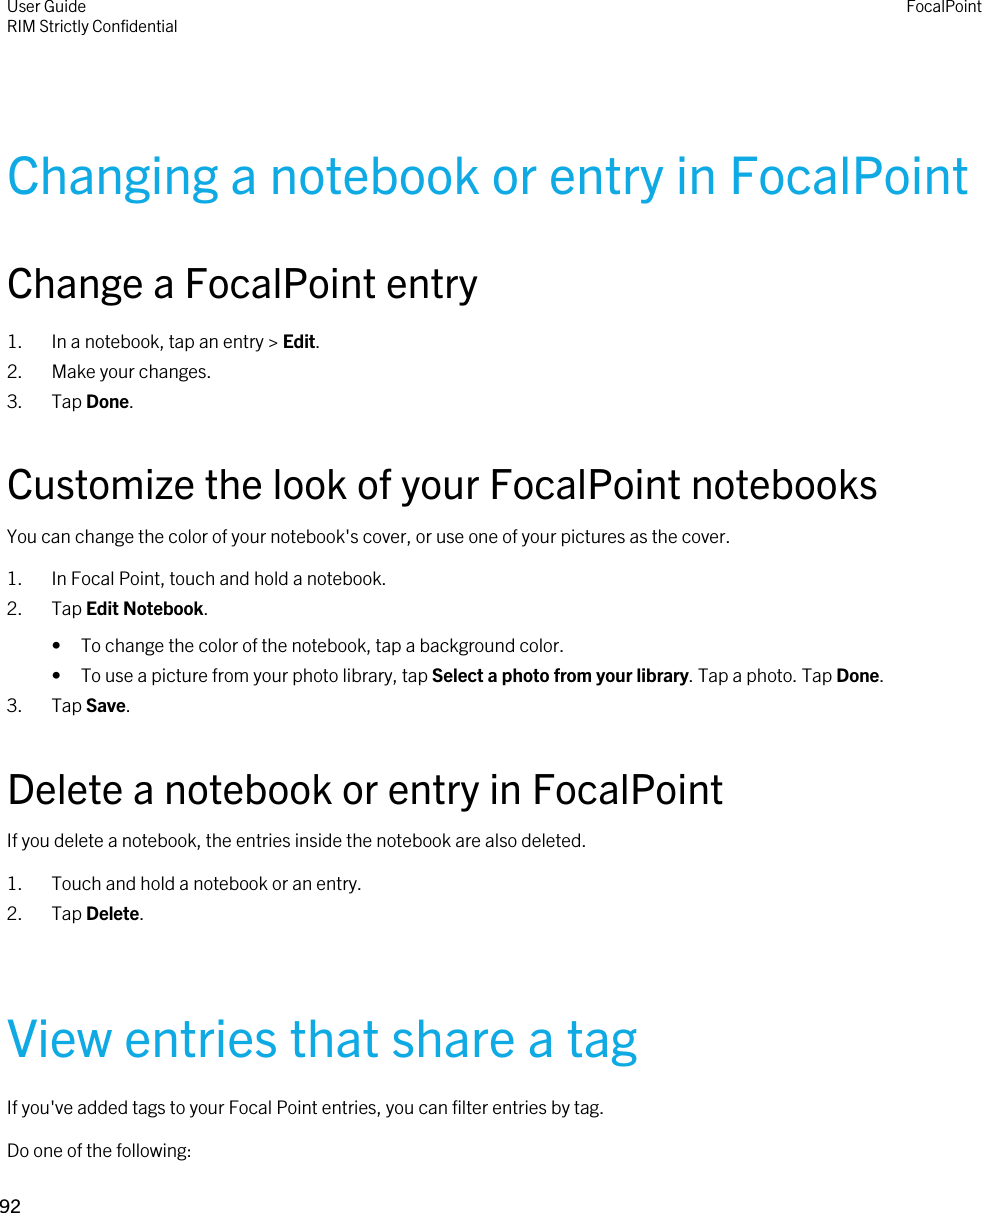 Changing a notebook or entry in FocalPointChange a FocalPoint entry1. In a notebook, tap an entry &gt; Edit.2. Make your changes.3. Tap Done.Customize the look of your FocalPoint notebooksYou can change the color of your notebook&apos;s cover, or use one of your pictures as the cover.1. In Focal Point, touch and hold a notebook.2. Tap Edit Notebook.• To change the color of the notebook, tap a background color.• To use a picture from your photo library, tap Select a photo from your library. Tap a photo. Tap Done.3. Tap Save.Delete a notebook or entry in FocalPointIf you delete a notebook, the entries inside the notebook are also deleted.1. Touch and hold a notebook or an entry.2. Tap Delete.View entries that share a tagIf you&apos;ve added tags to your Focal Point entries, you can filter entries by tag.Do one of the following:User GuideRIM Strictly Confidential FocalPoint92 